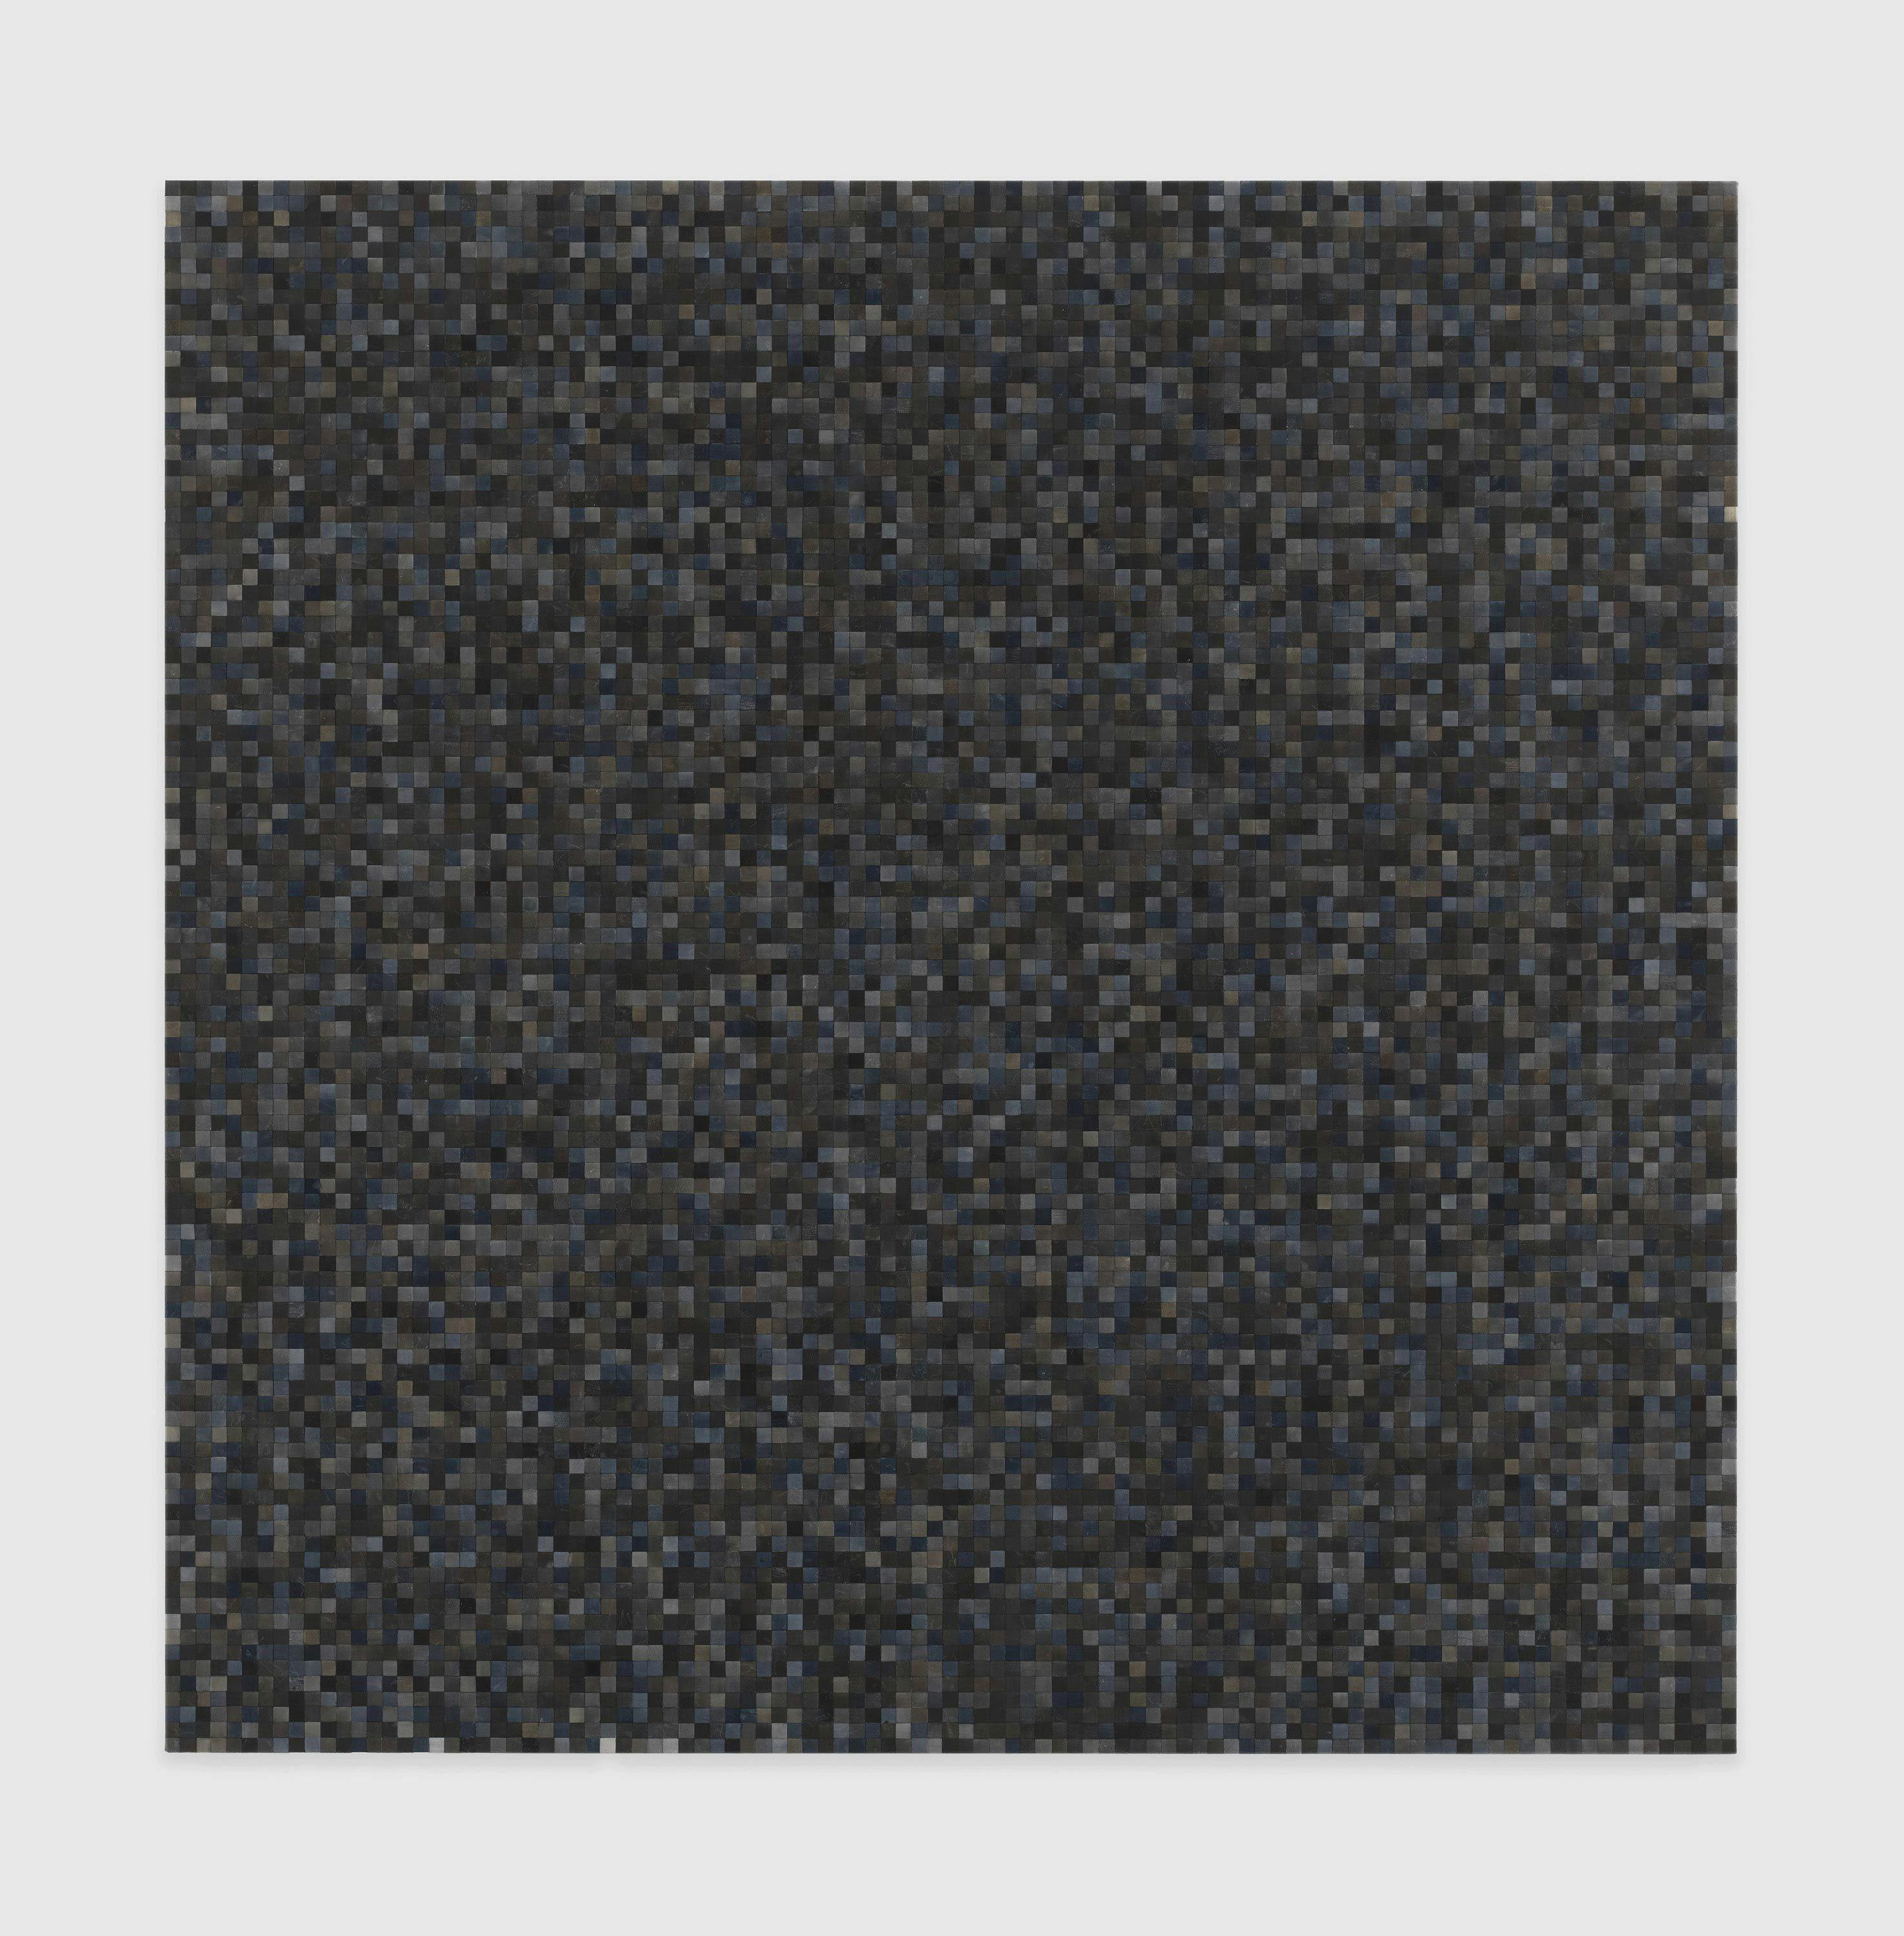 A painting by Toba Khedoori, titled Untitled (black squares), dated 2011 to 2012.